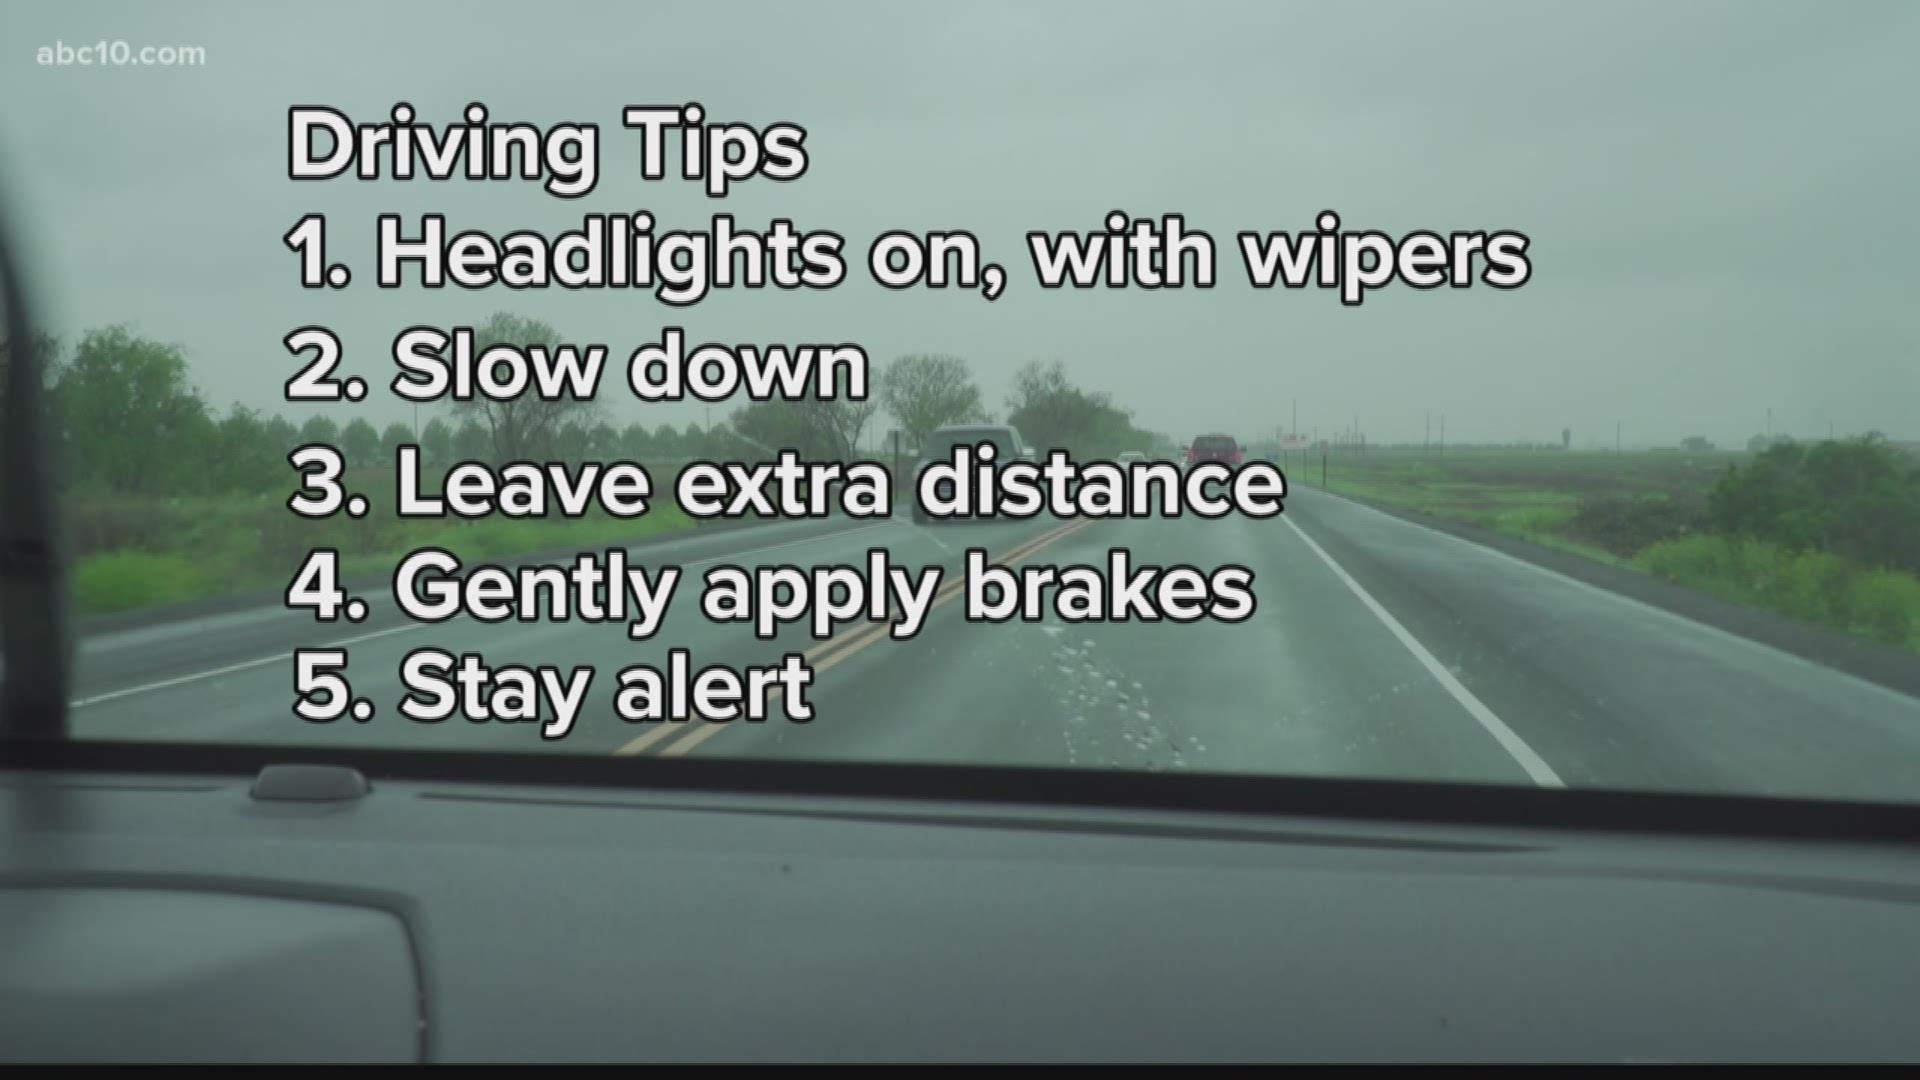 Tips for driving in the rain - B Staying focused and alert while driving in the rain